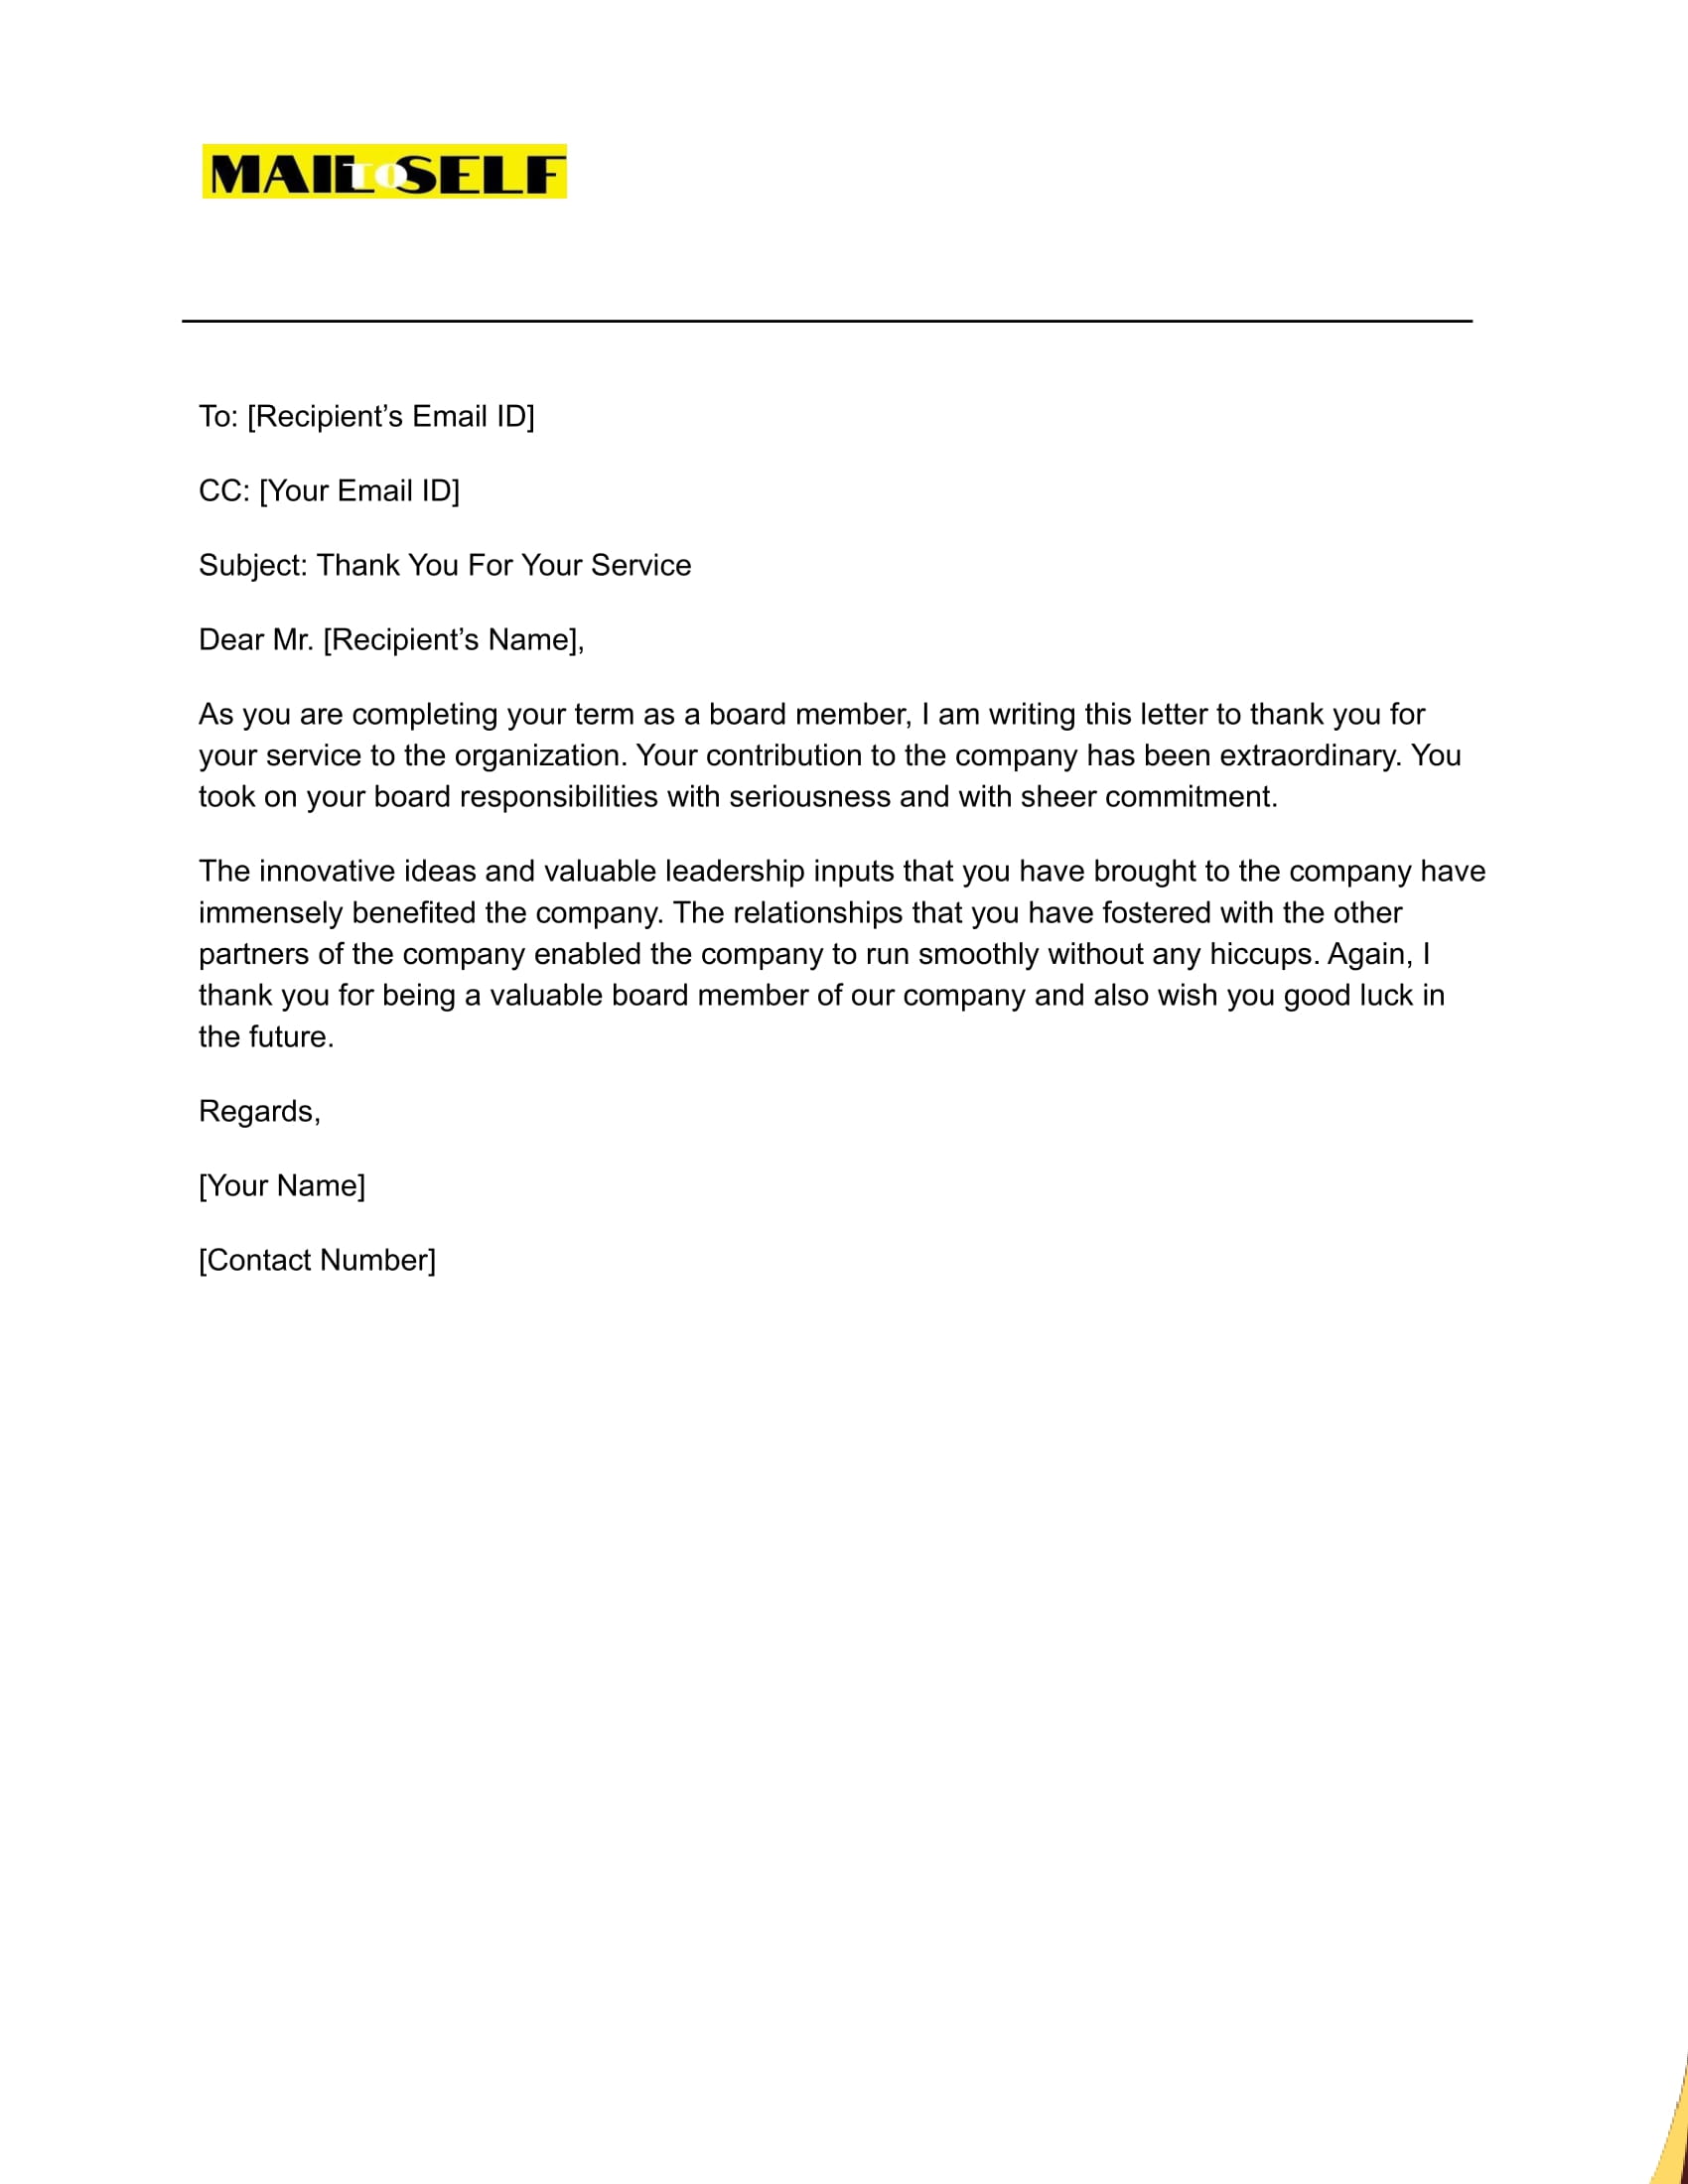 Sample #1 Thank You Letter to Board Members Leaving